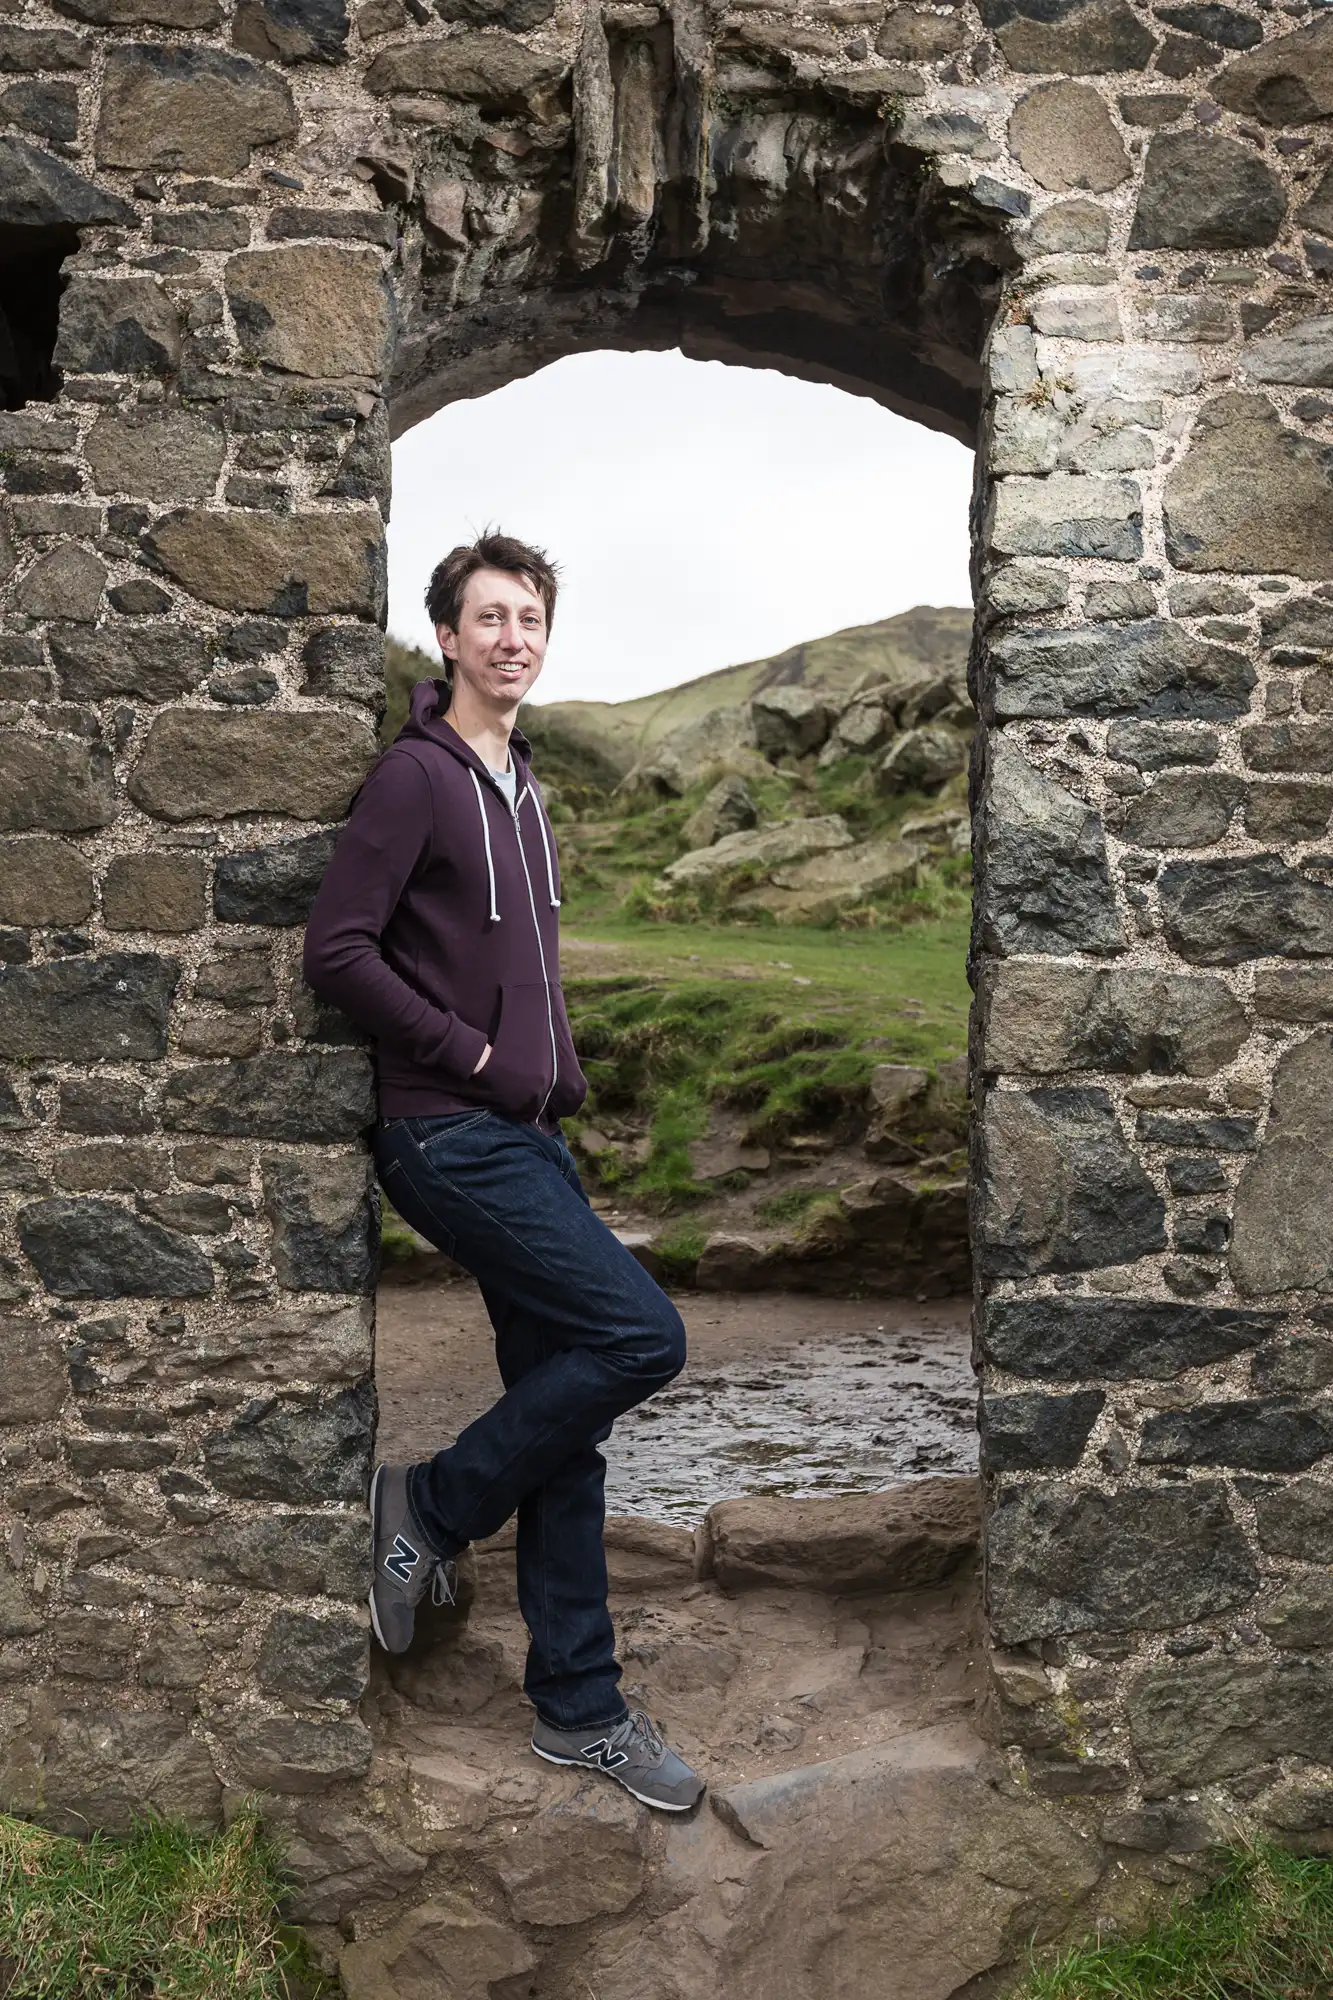 A man leaning in a stone archway with a natural landscape in the background. he is smiling, dressed casually, and has one foot elevated on the arch.